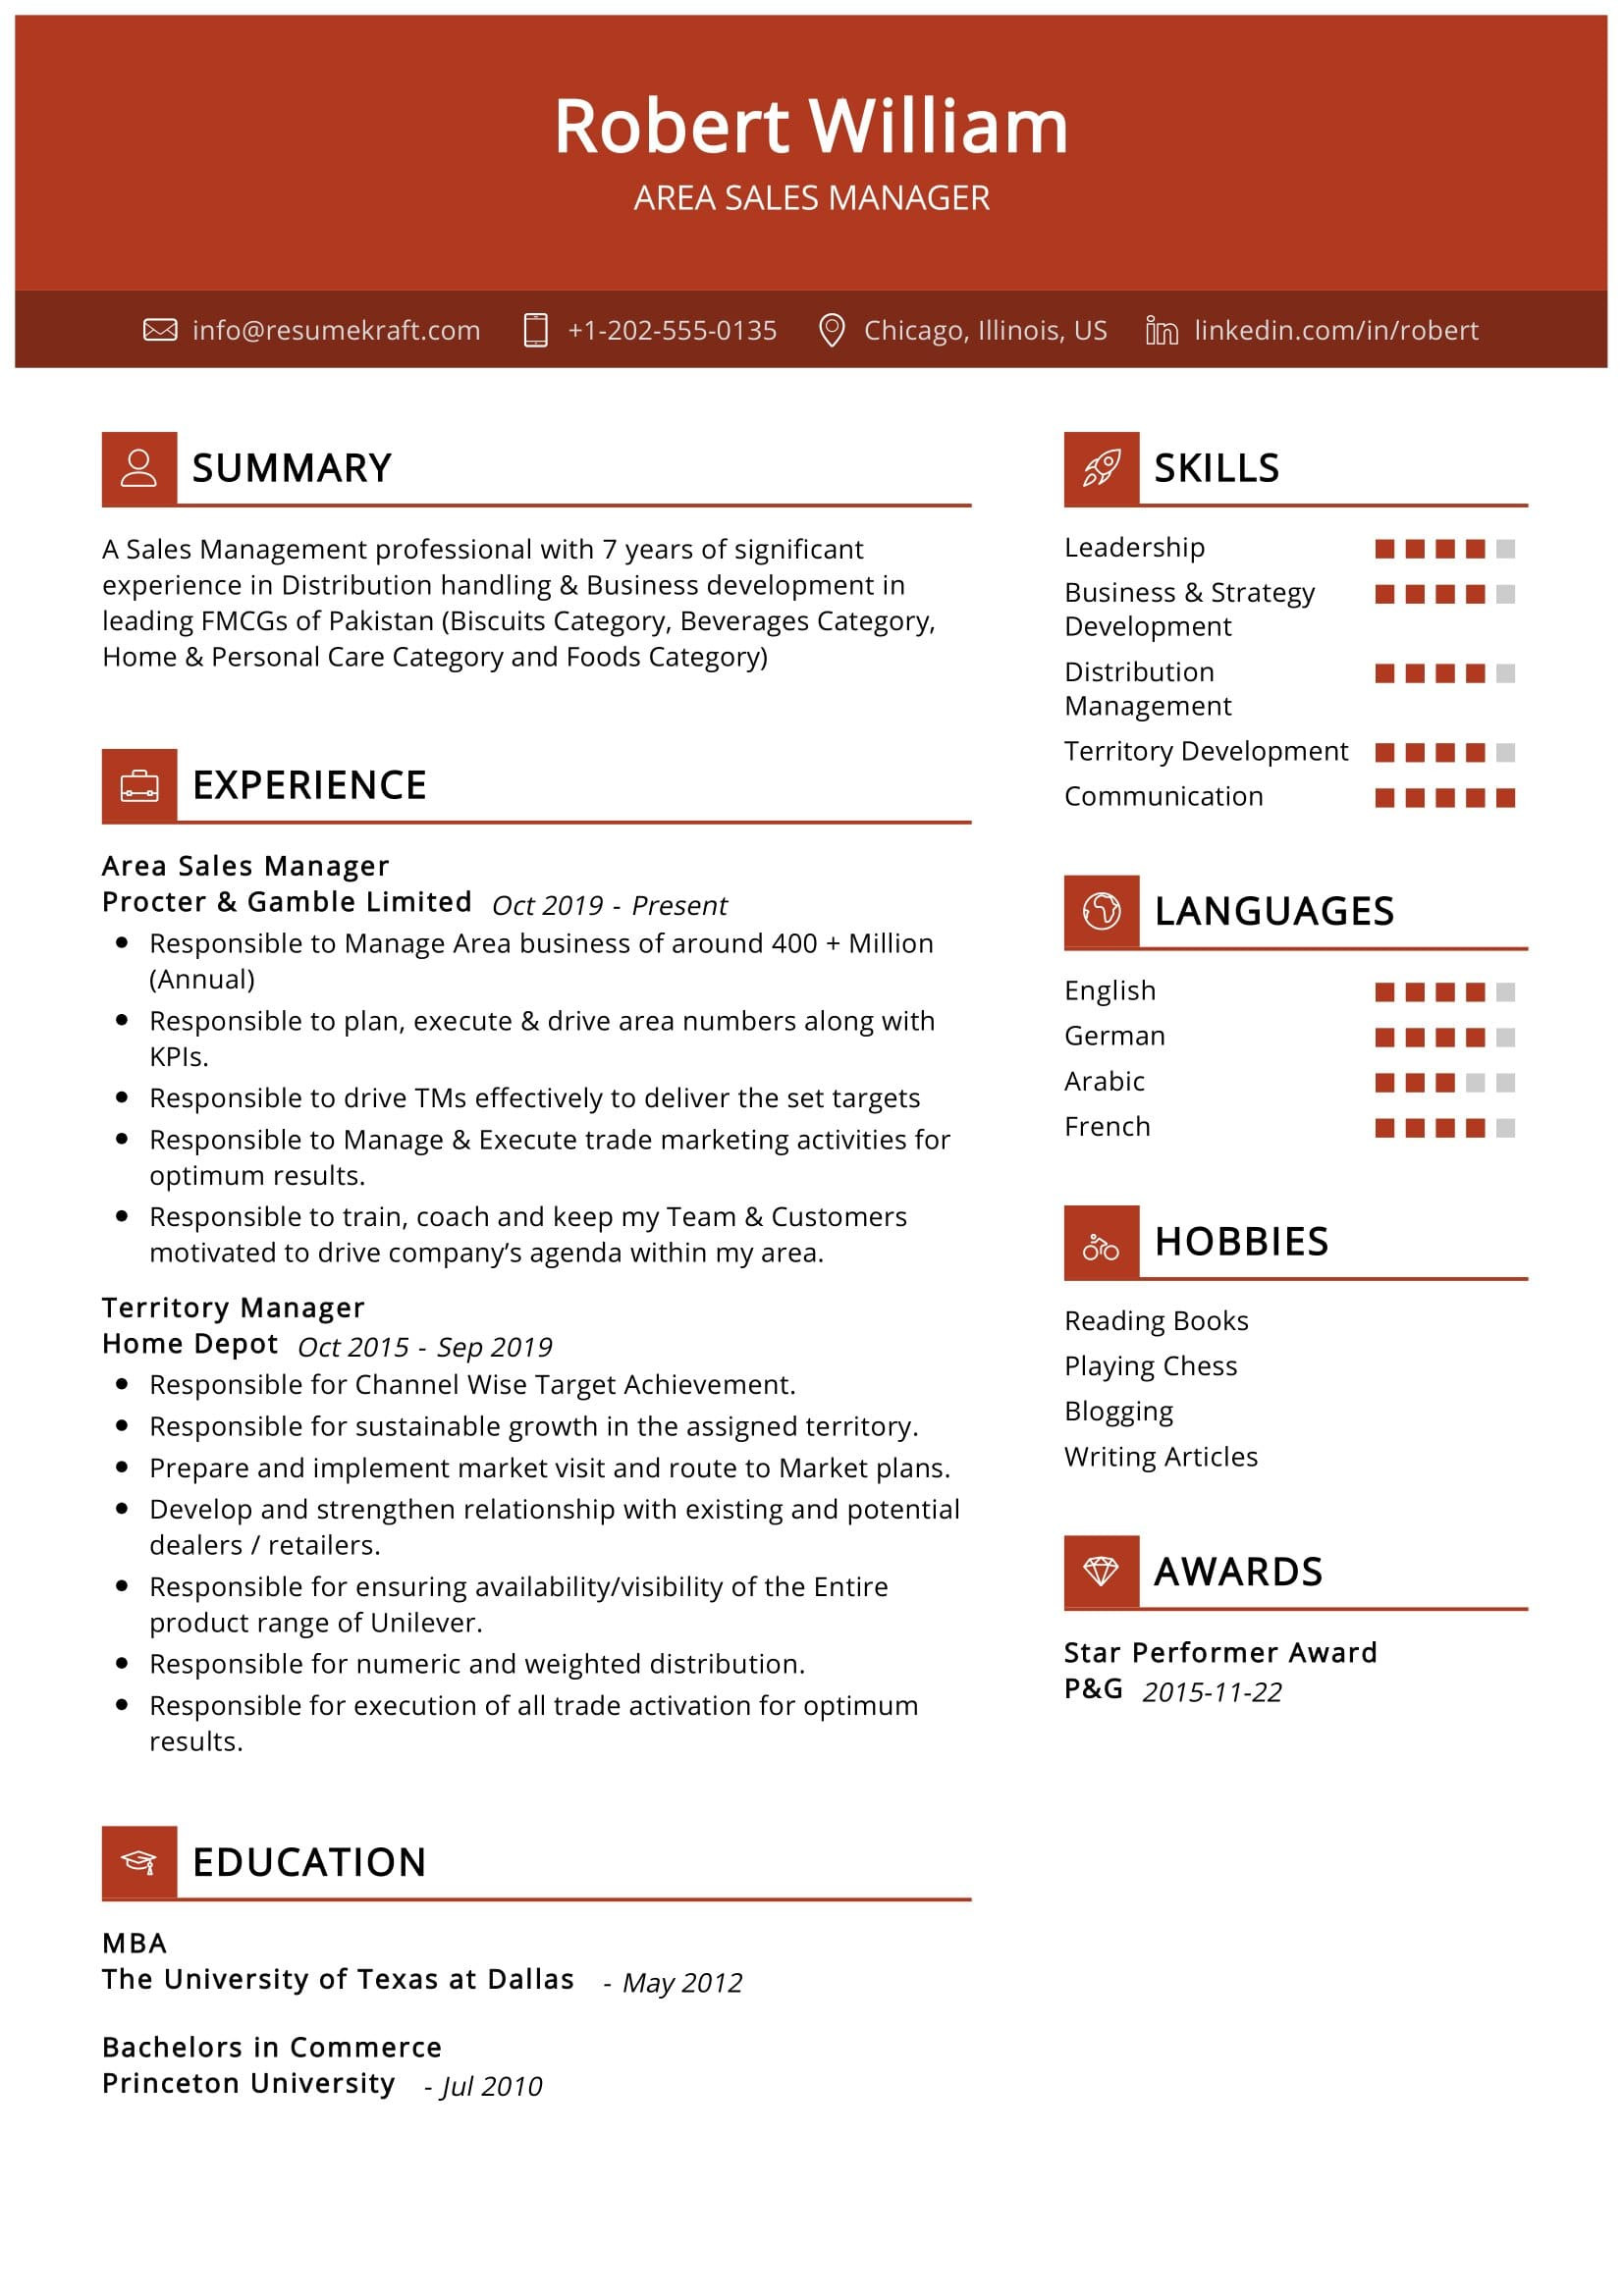 Sales Manager Resume Trade Show Experience Cover Letter Sample area Sales Manager Resume Sample 2022 Writing Tips – Resumekraft